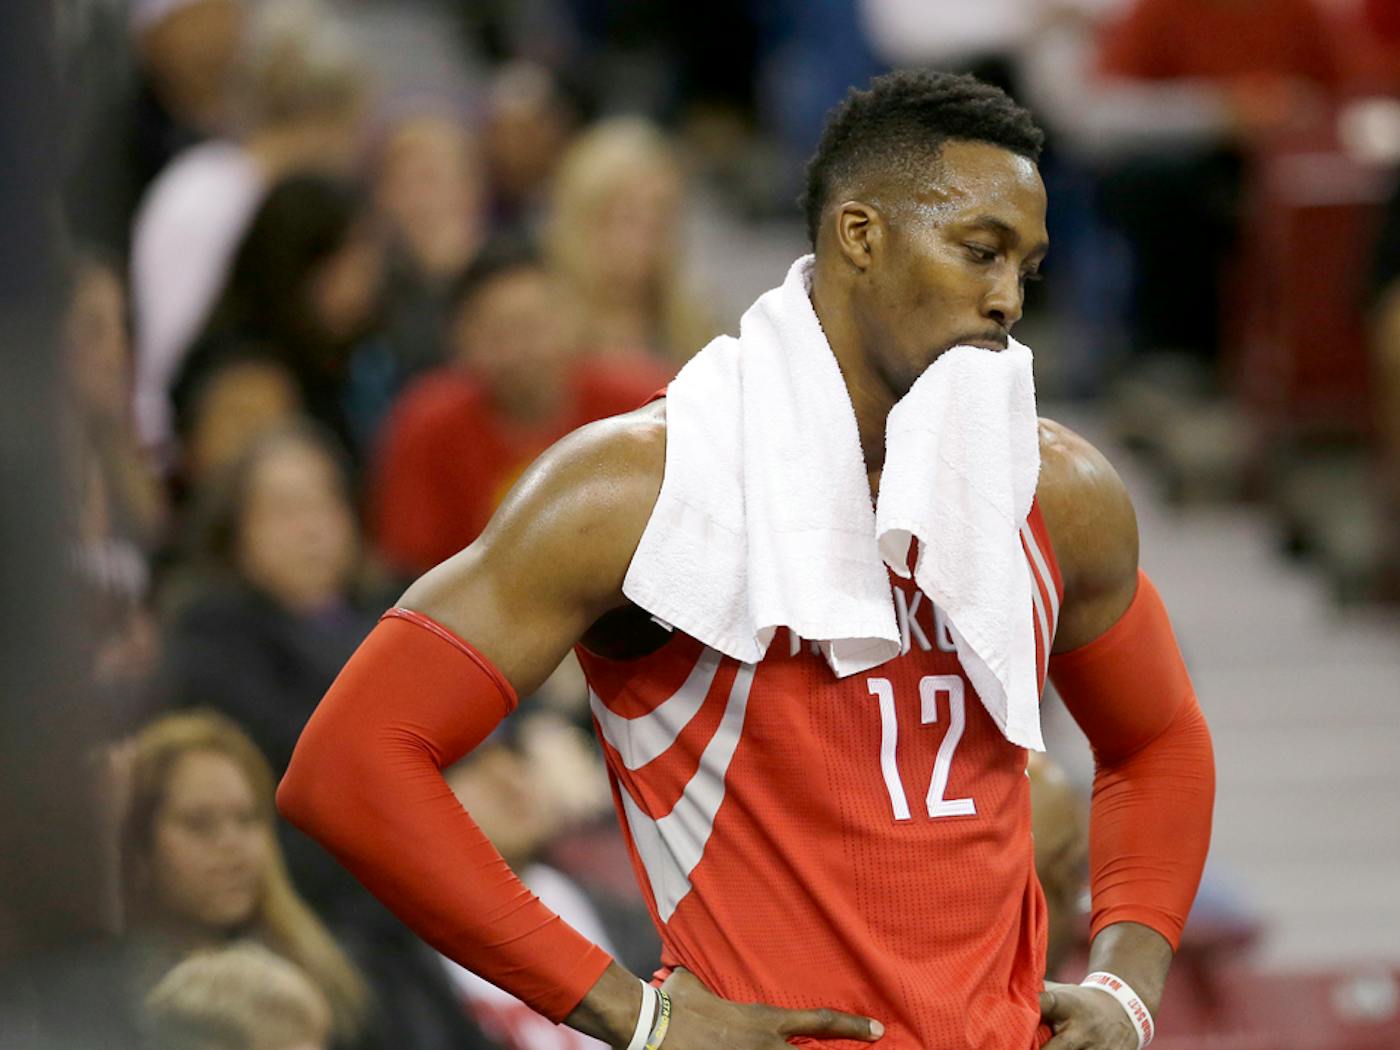 Dwight Howard to sign one-year deal with Wizards, according to